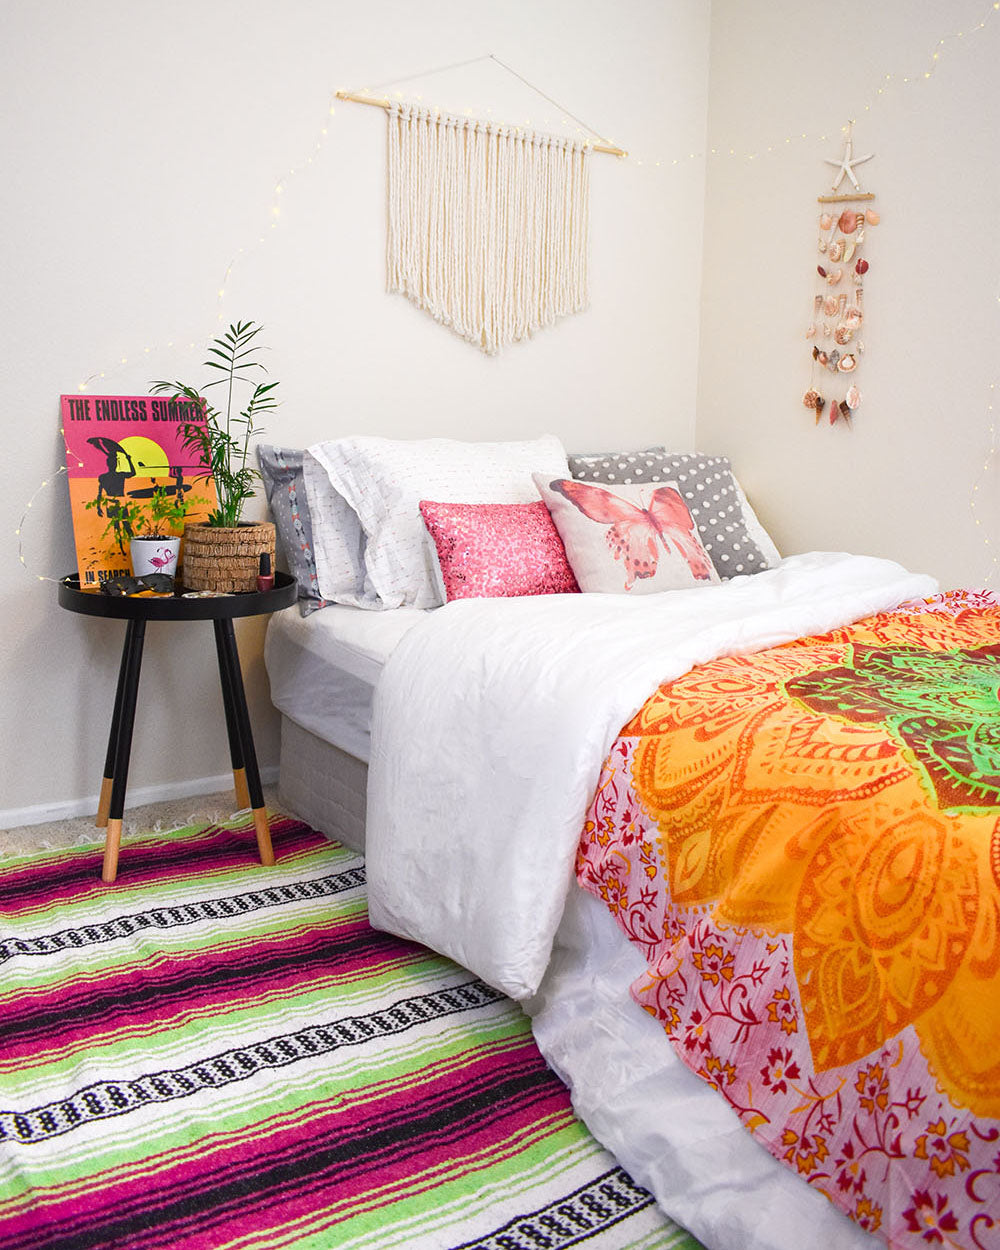 One of the best parts about moving into a new dorm room freshman year (or even your first apartment, post-dorm life for you sophomores and juniors) is decorating your space. Have you already started planning your dorm room decor? Here are a few ideas to get you started or add to what you already have planned. 